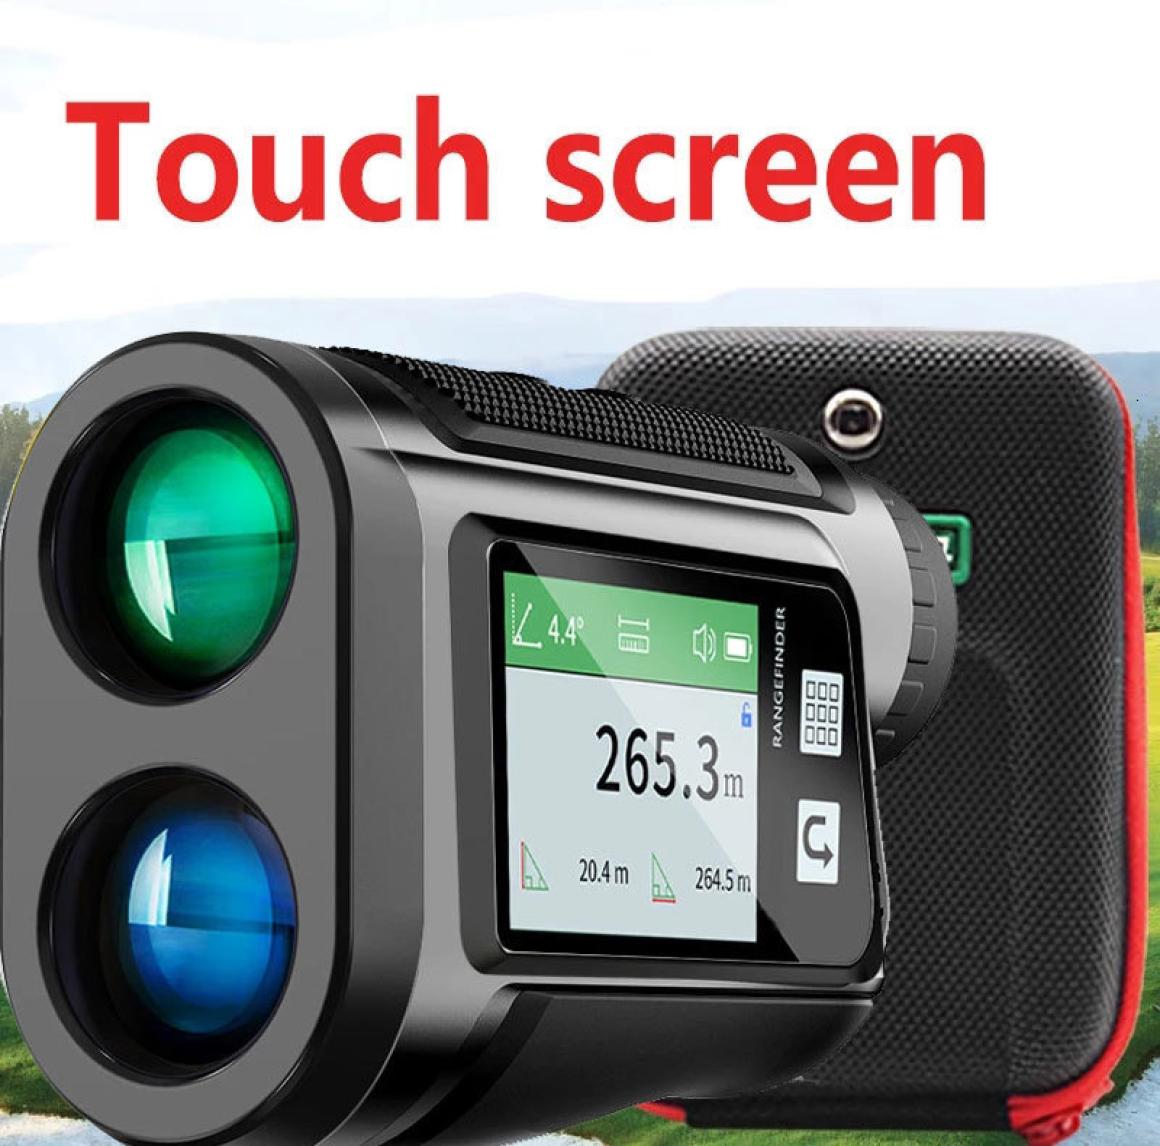 

Telescopes touch screen Range Finder Golf Telescope rechargeable Laser rangefinder LCD Display Distance meter with FlagLock 600m